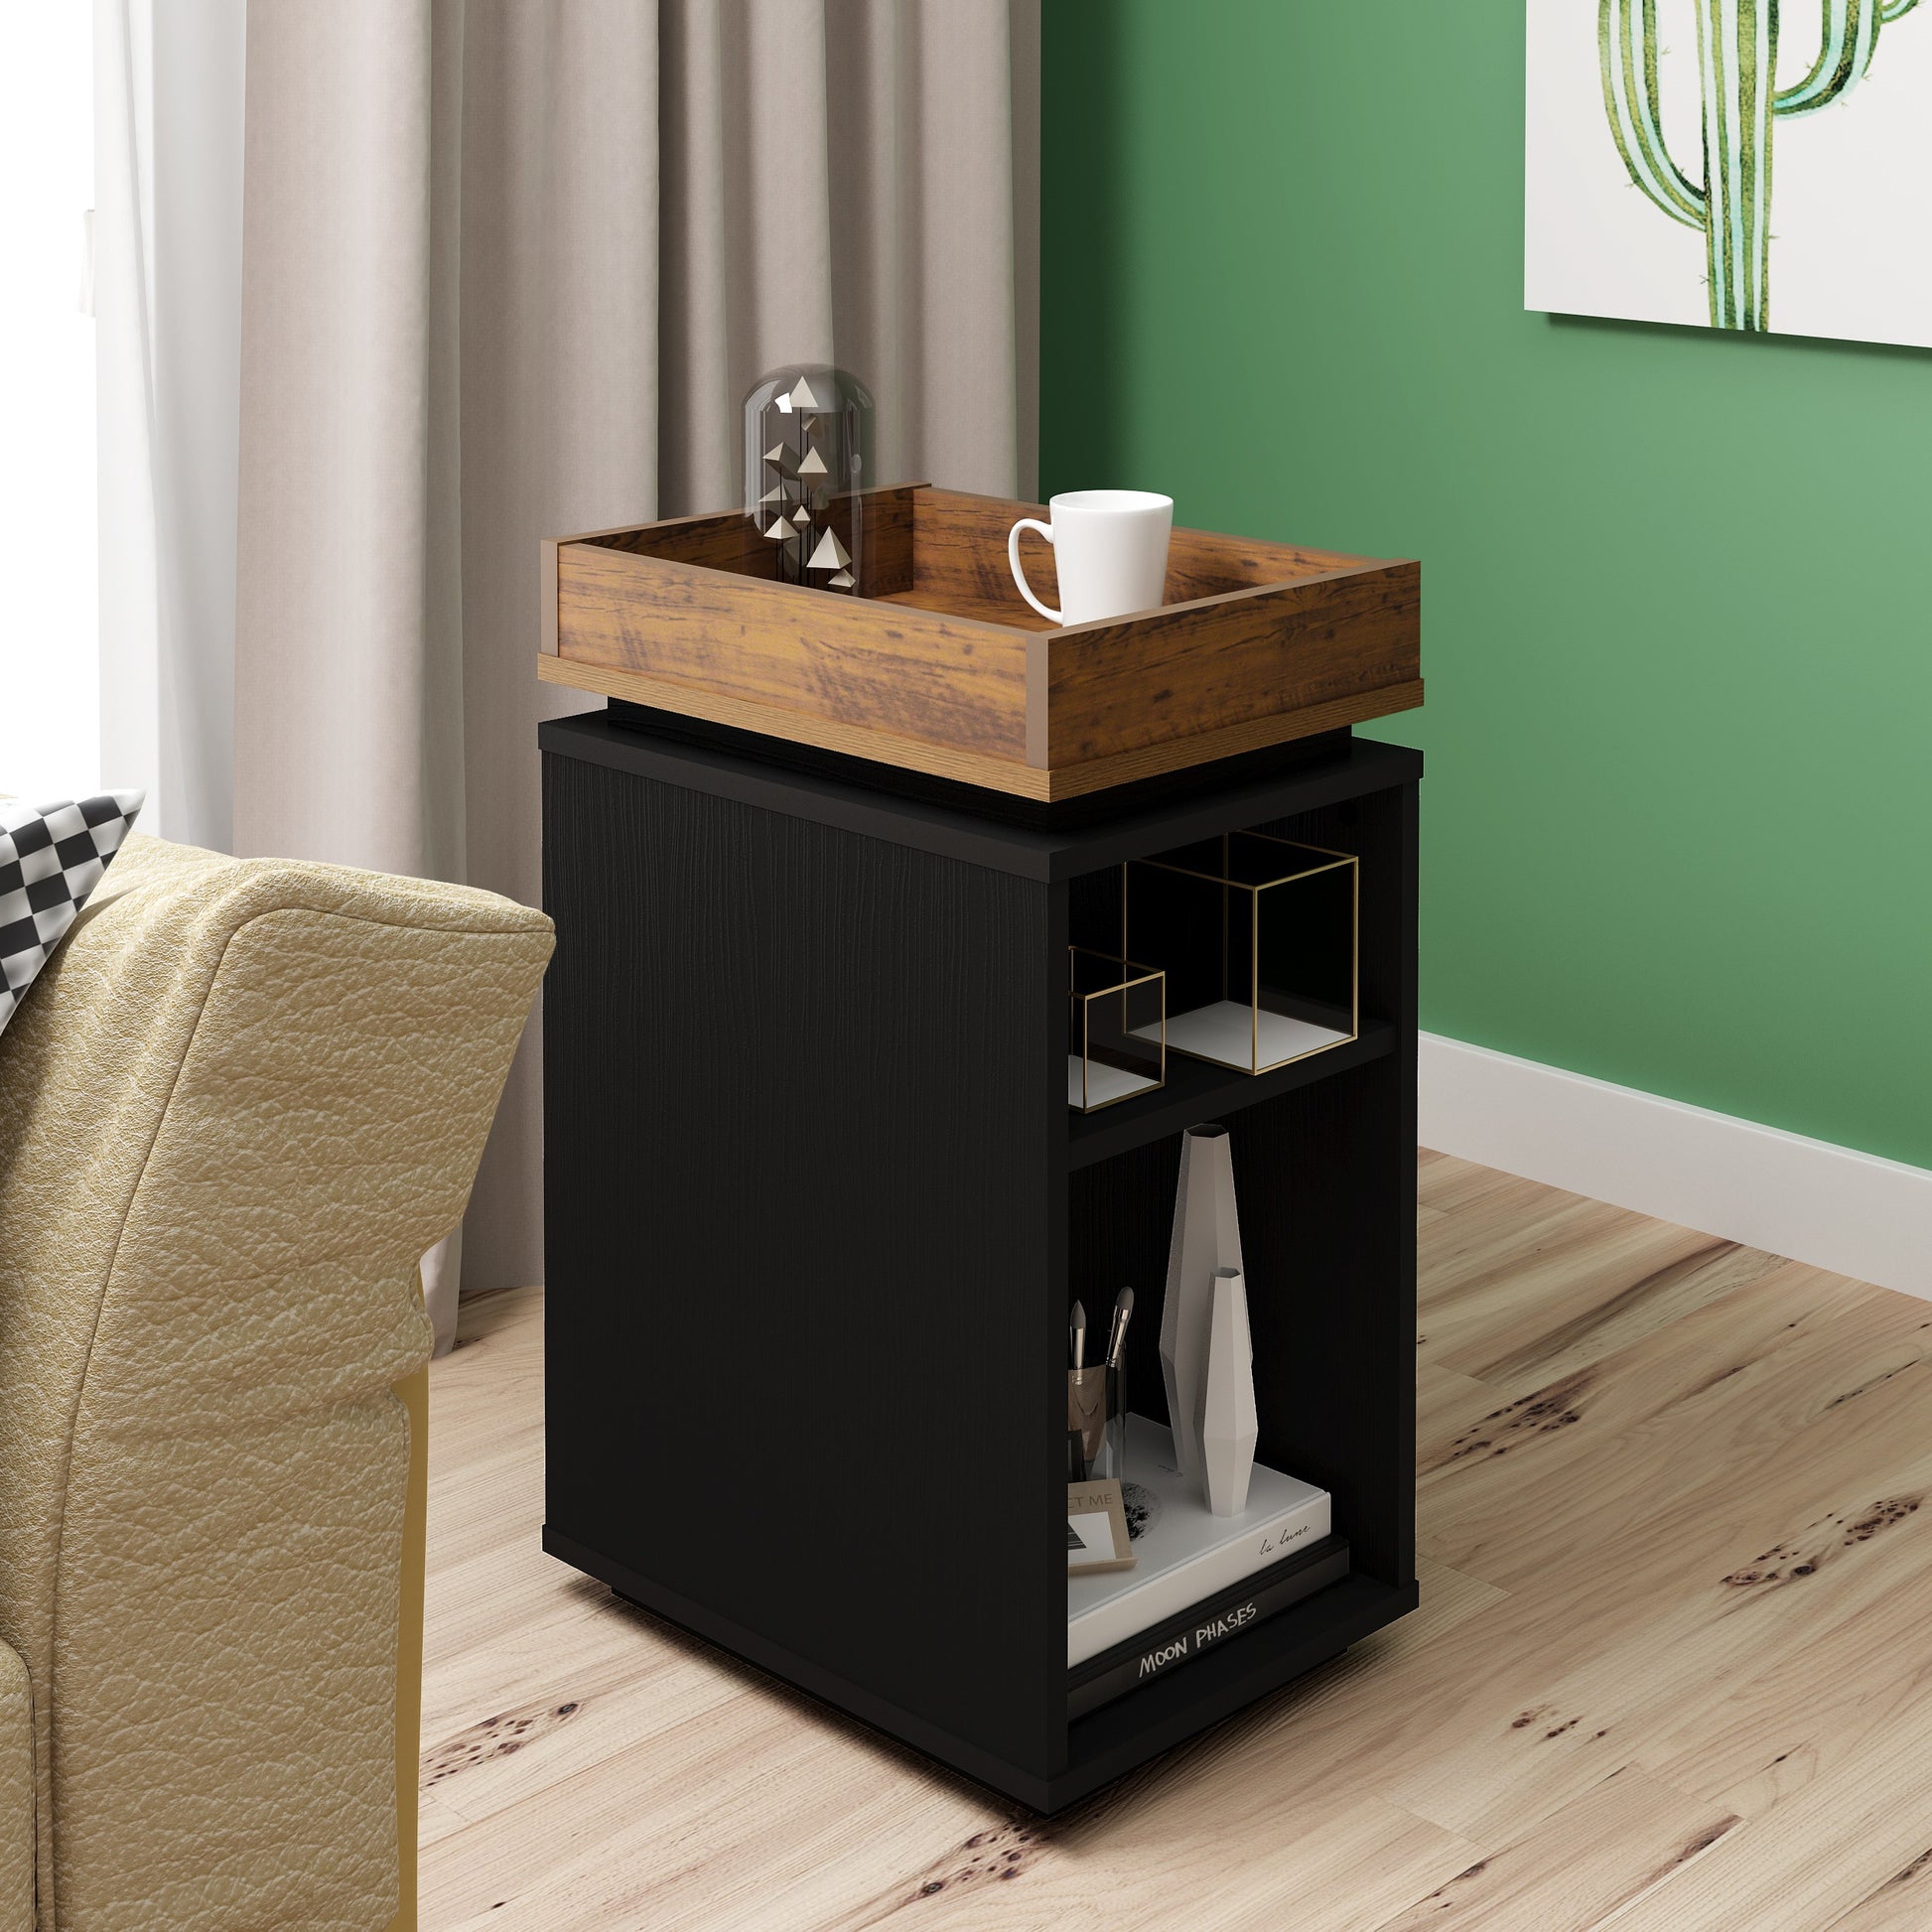 NAPLES-STORAGE-SIDE-TABLE-BLACK-AND-PINE-EFFECT-300-302-045-4.jpg